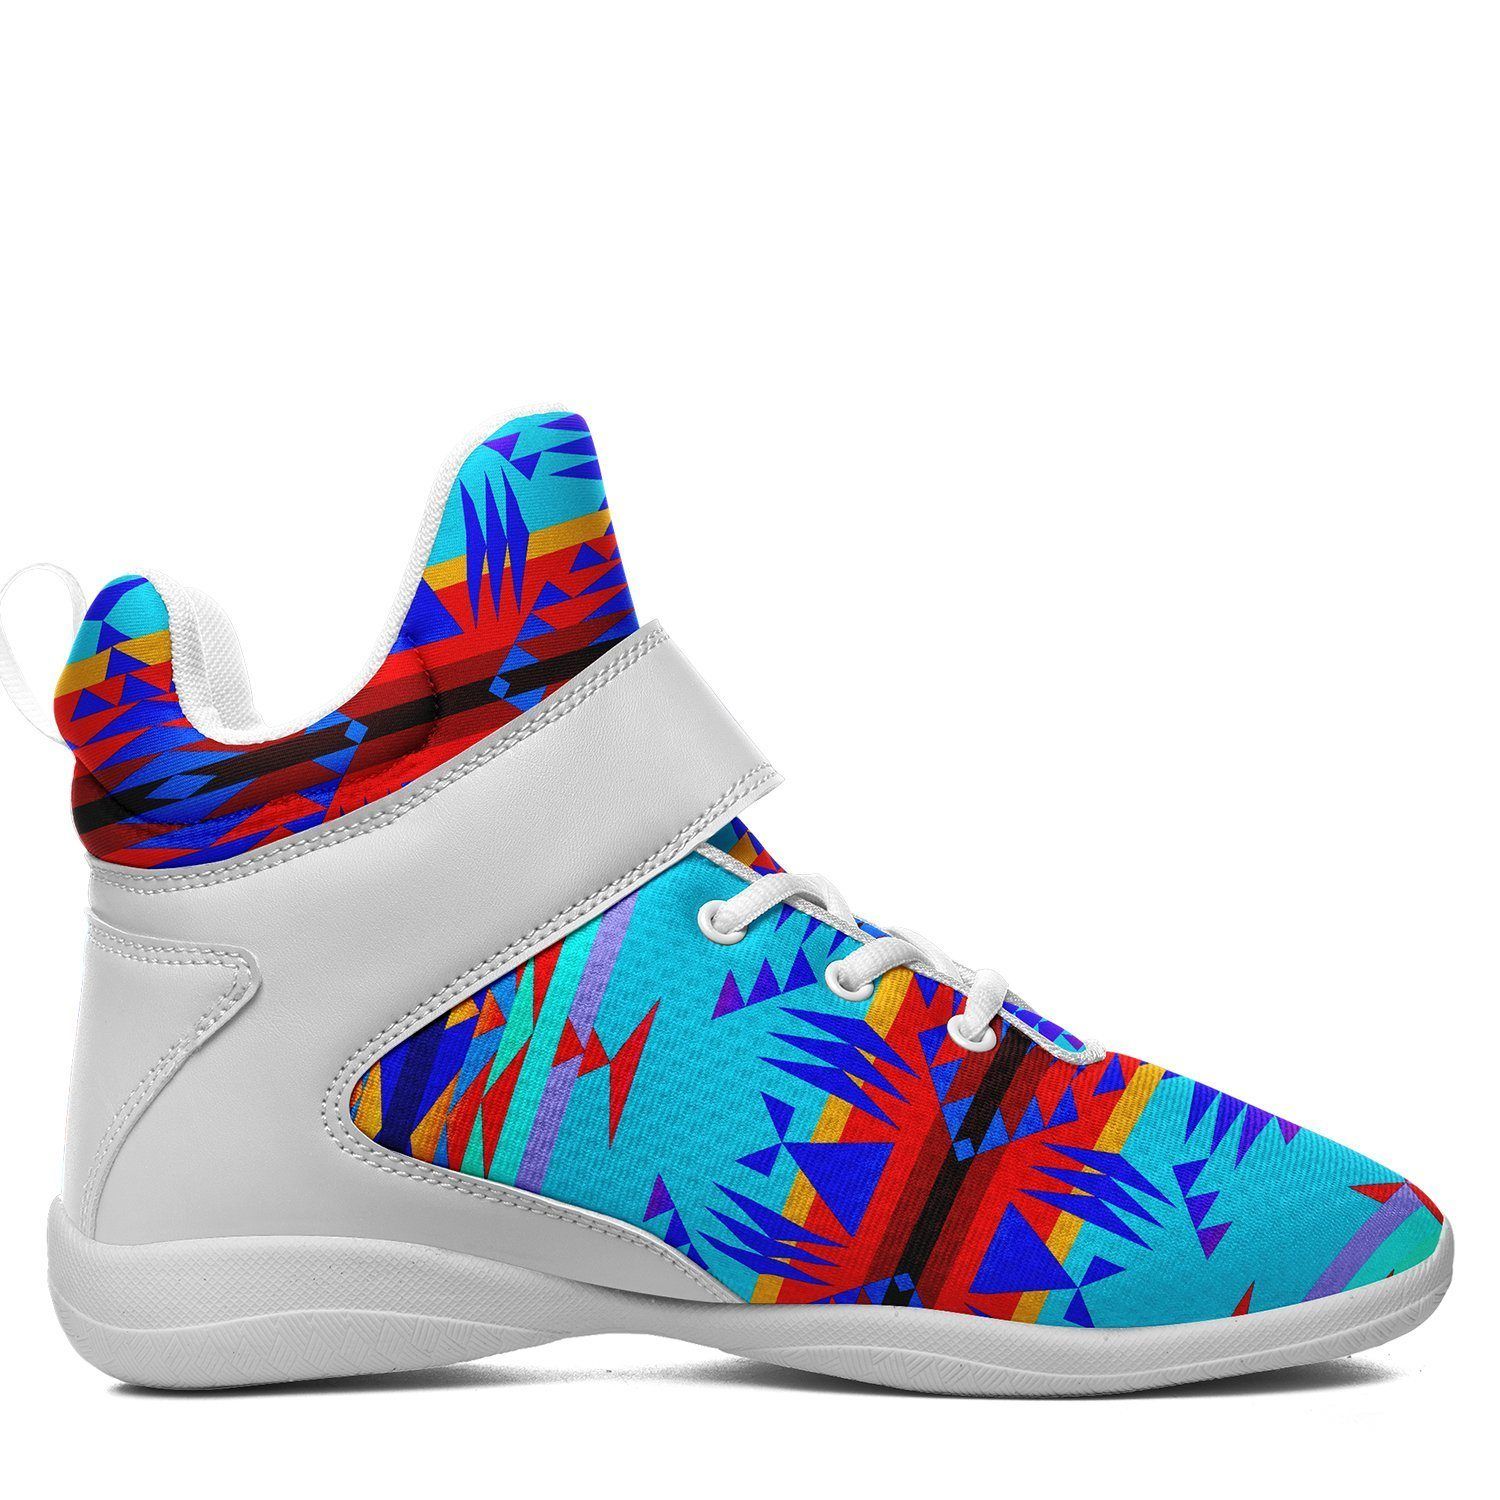 Between the Mountains Blue Ipottaa Basketball / Sport High Top Shoes - White Sole 49 Dzine 